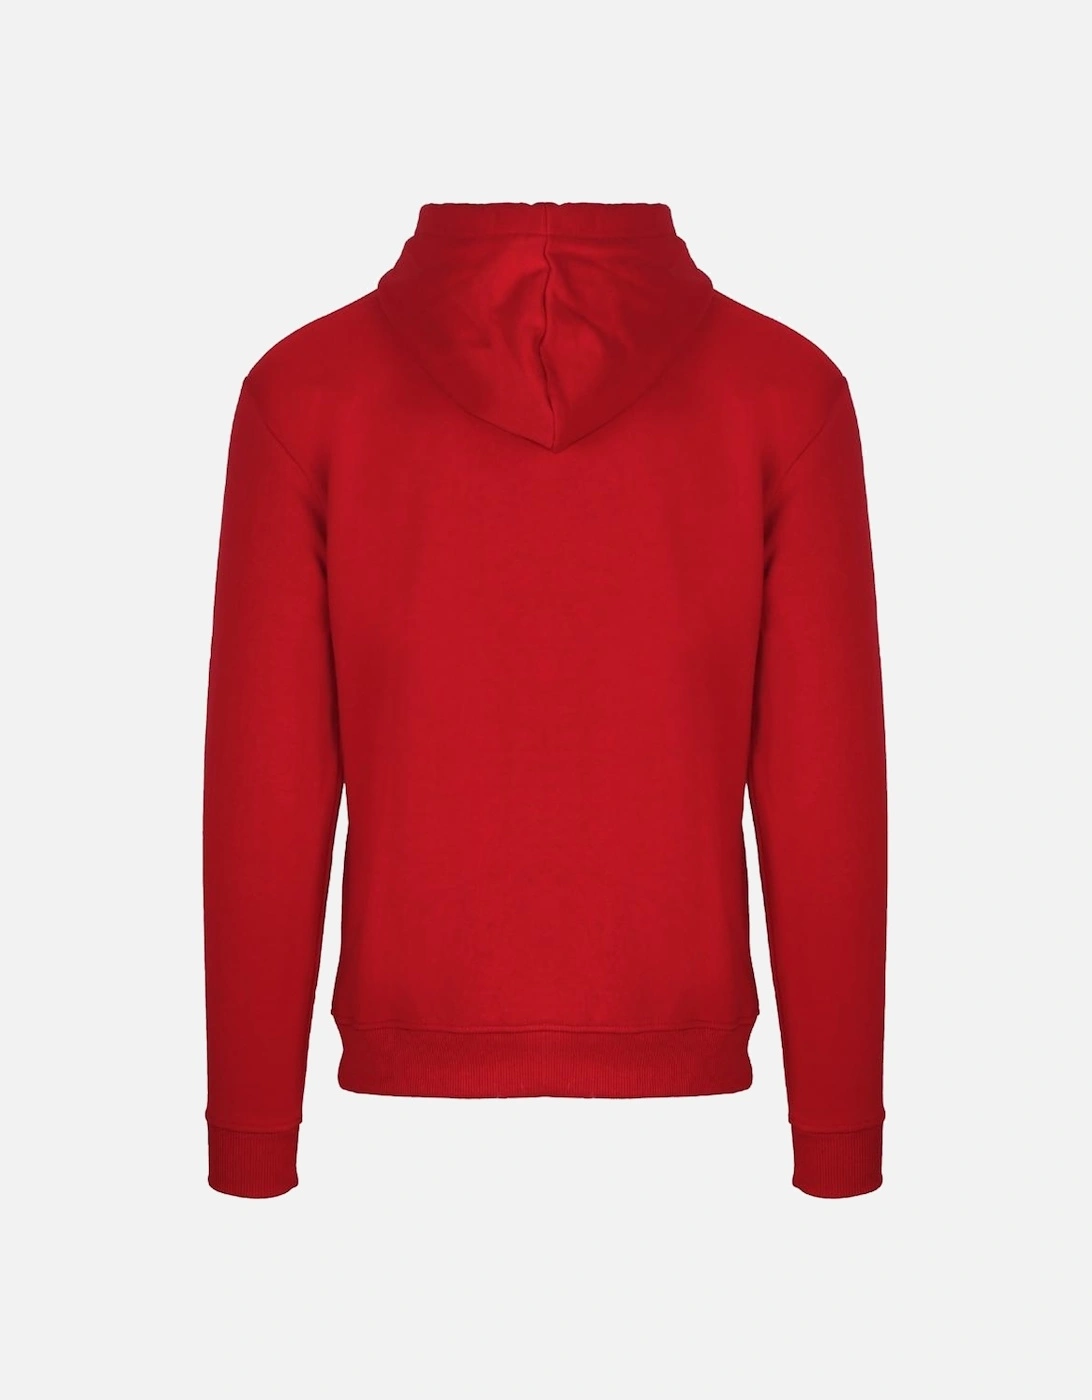 Check Aldis Crest Red Hoodie